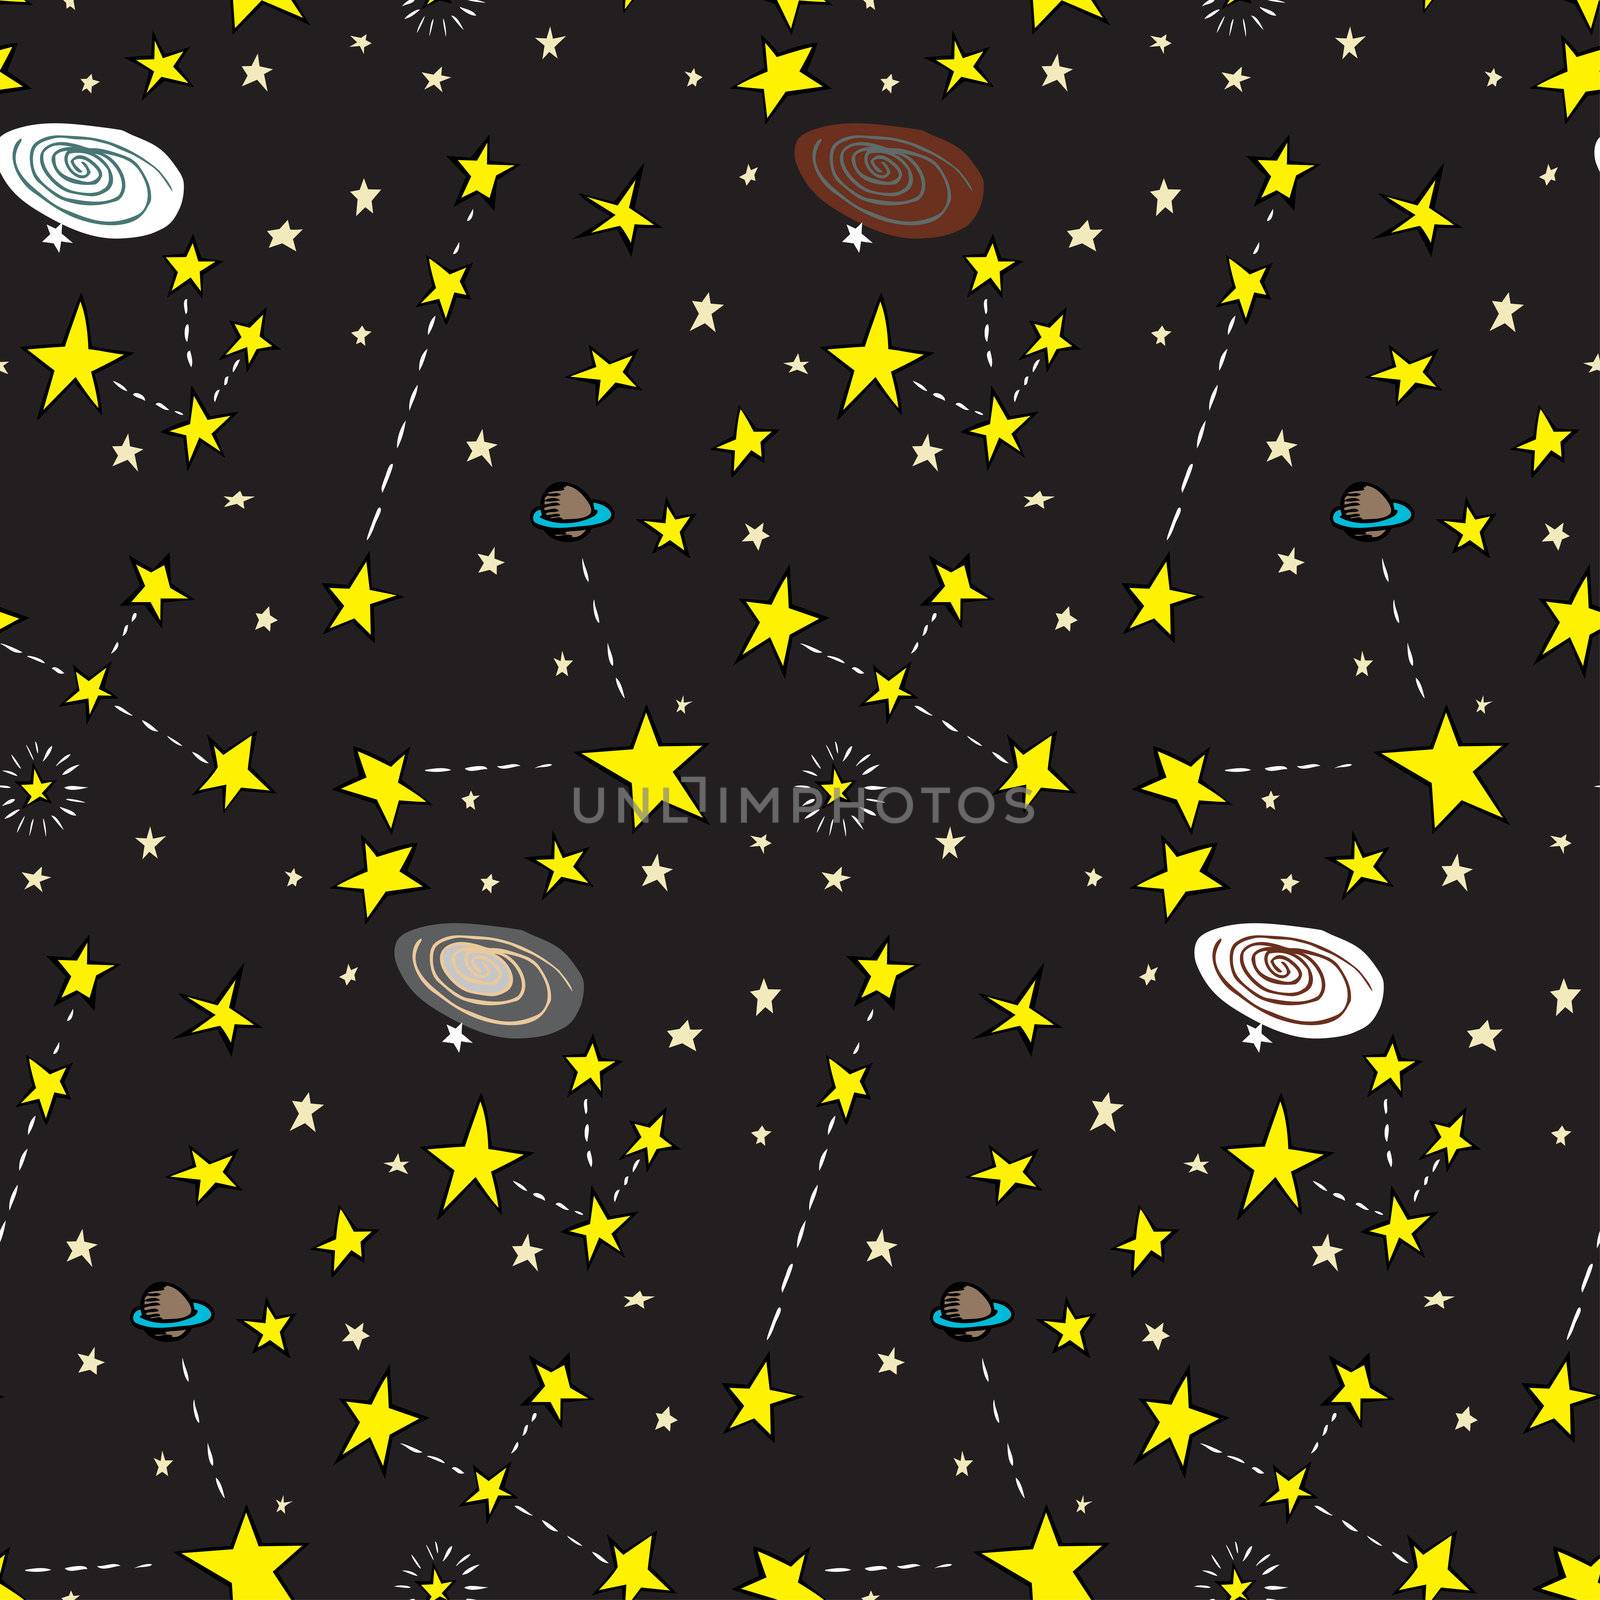 Seamless background of stars, planets and galaxies over black